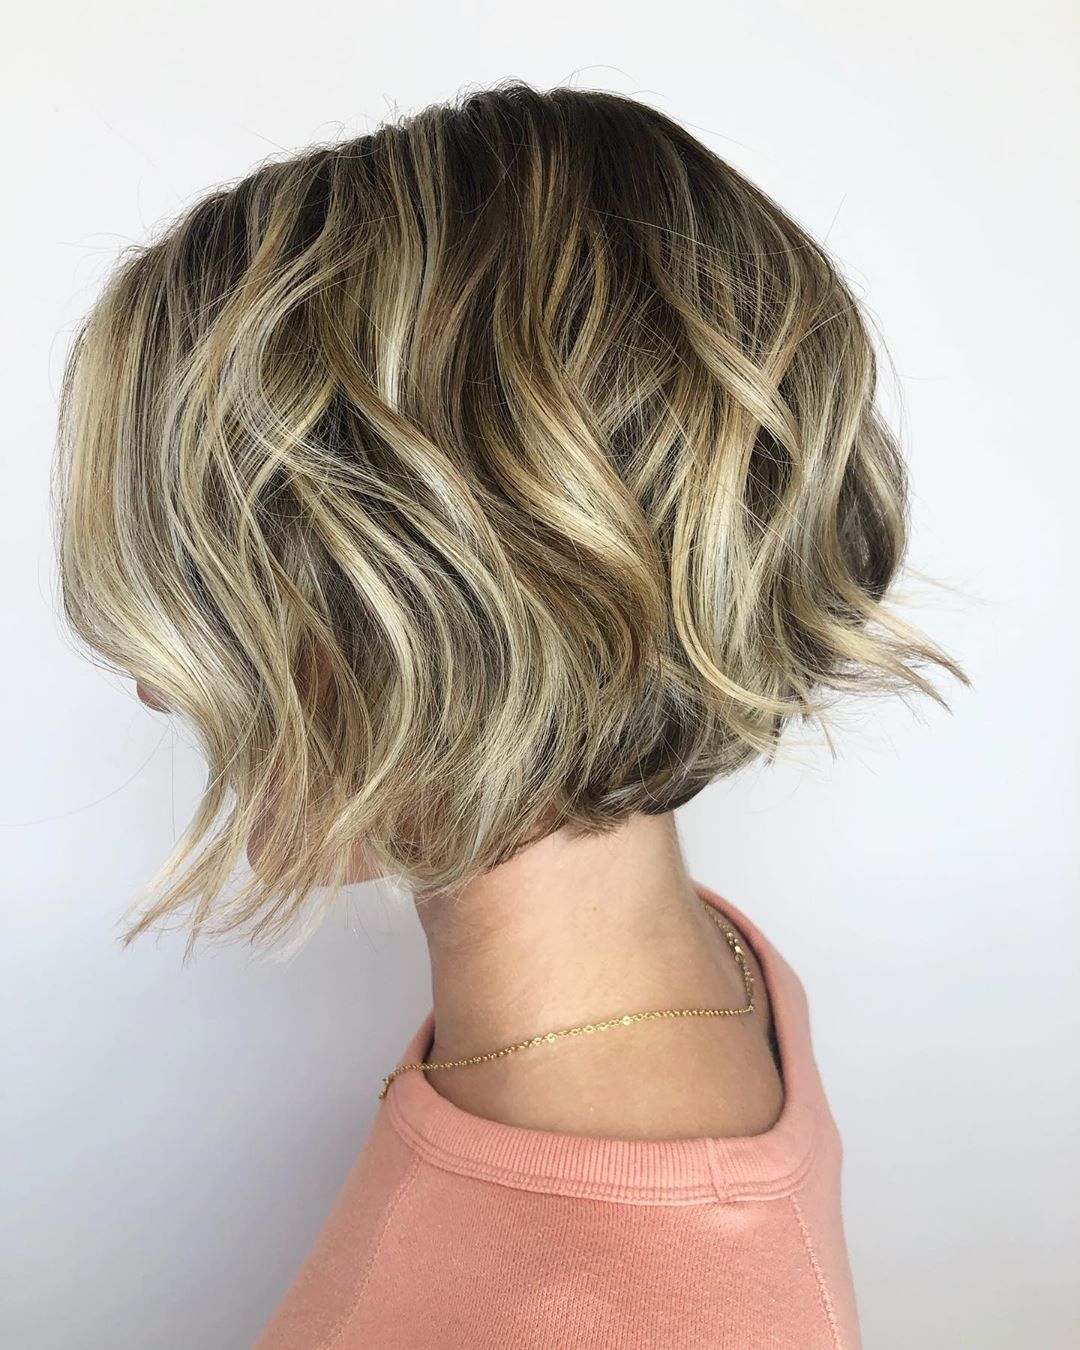 If you have thick hair try a choppy bob